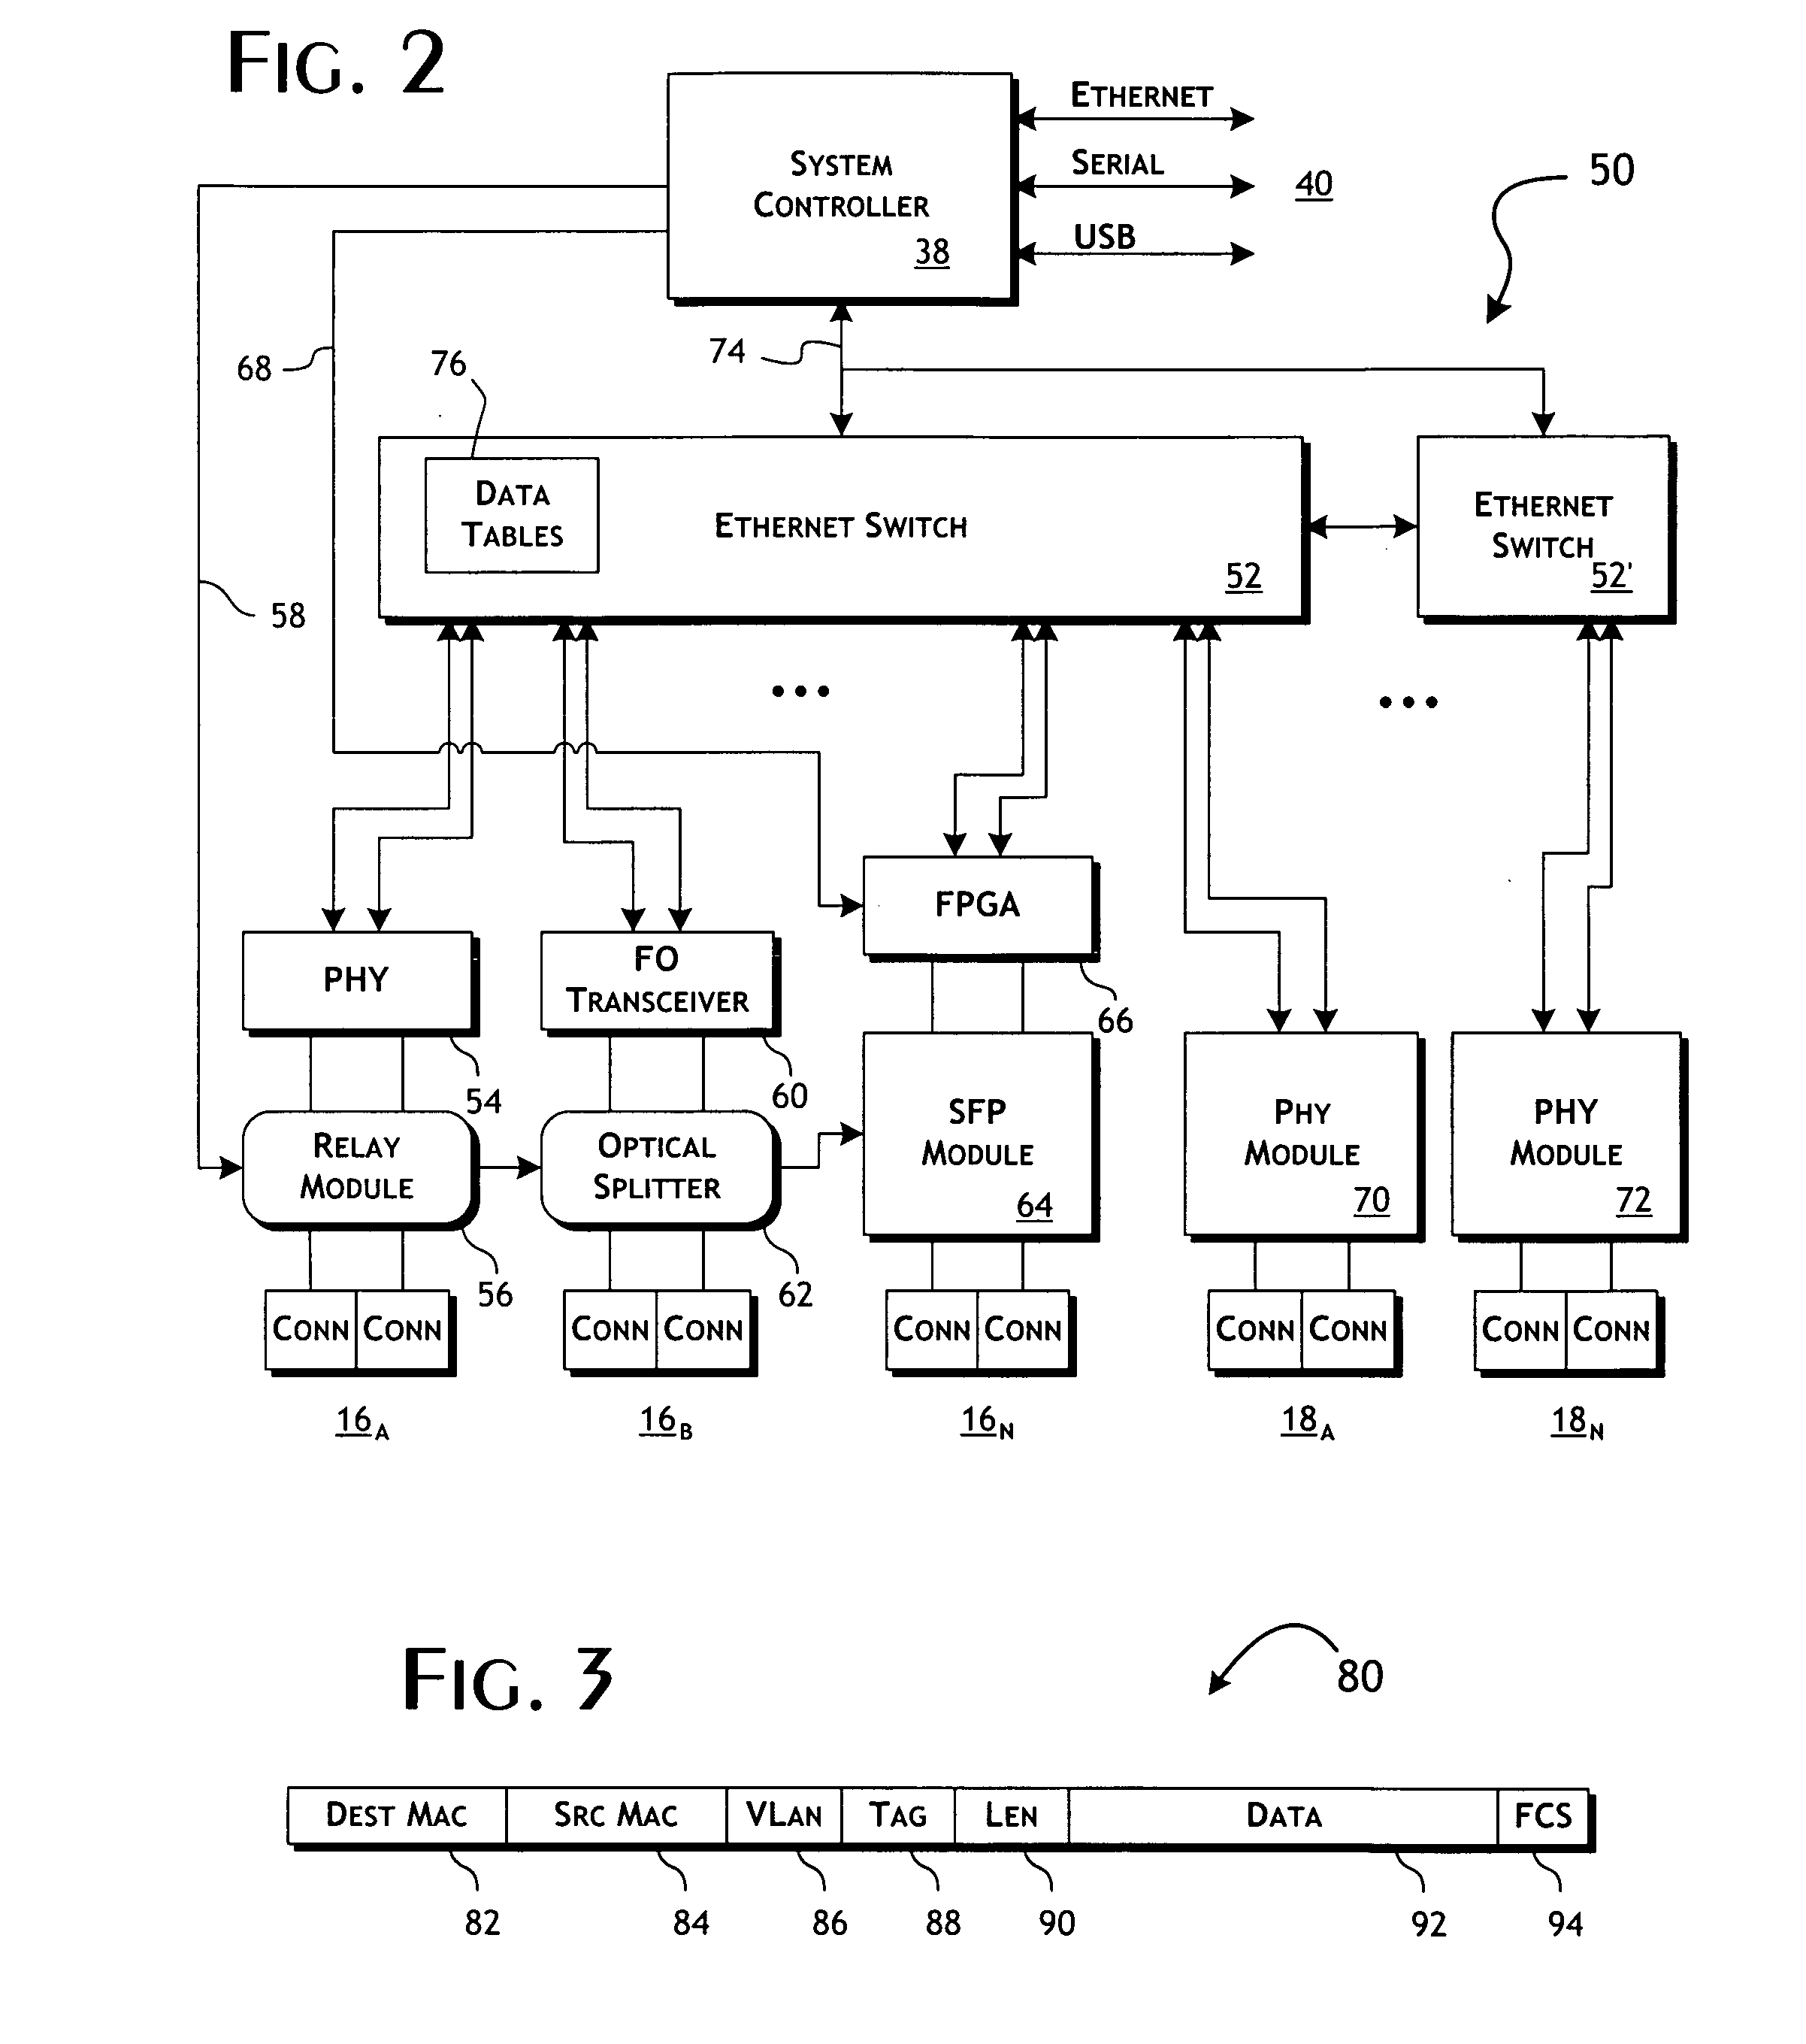 Ethernet switch-based network monitoring system and methods